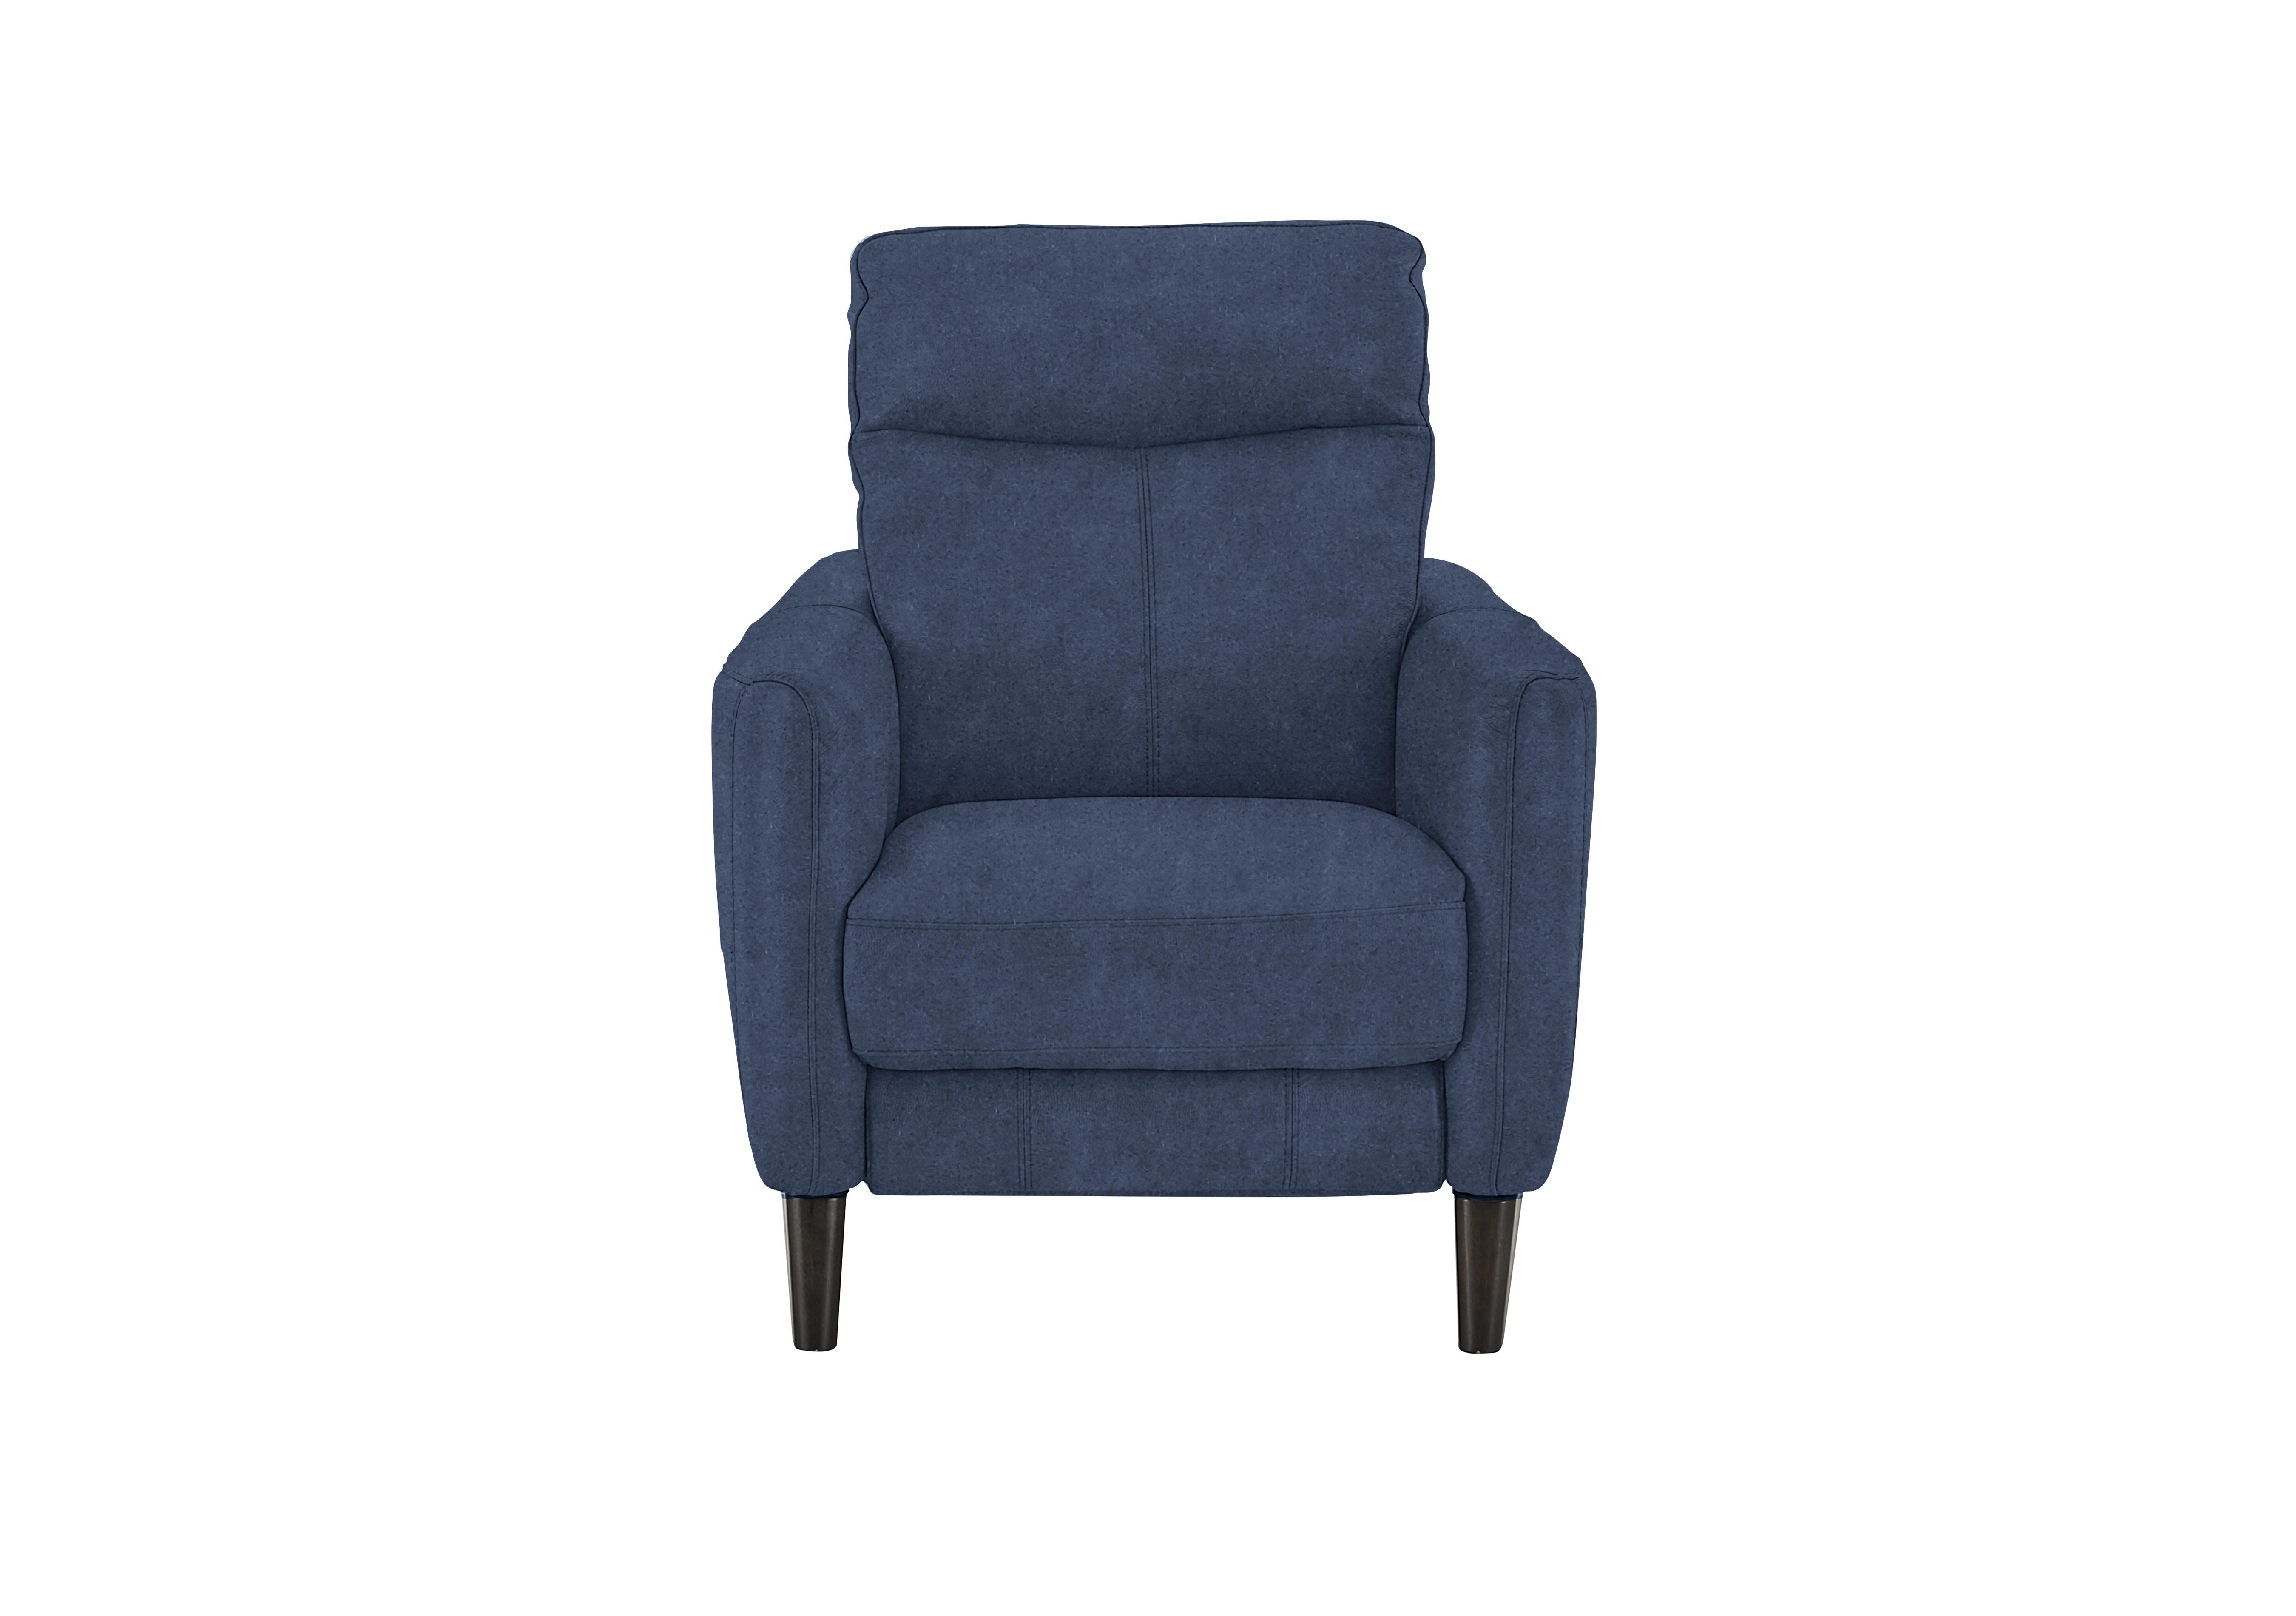 Compact Collection Petit Fabric Armchair in Bfa-Blj-R10 Blue on Furniture Village